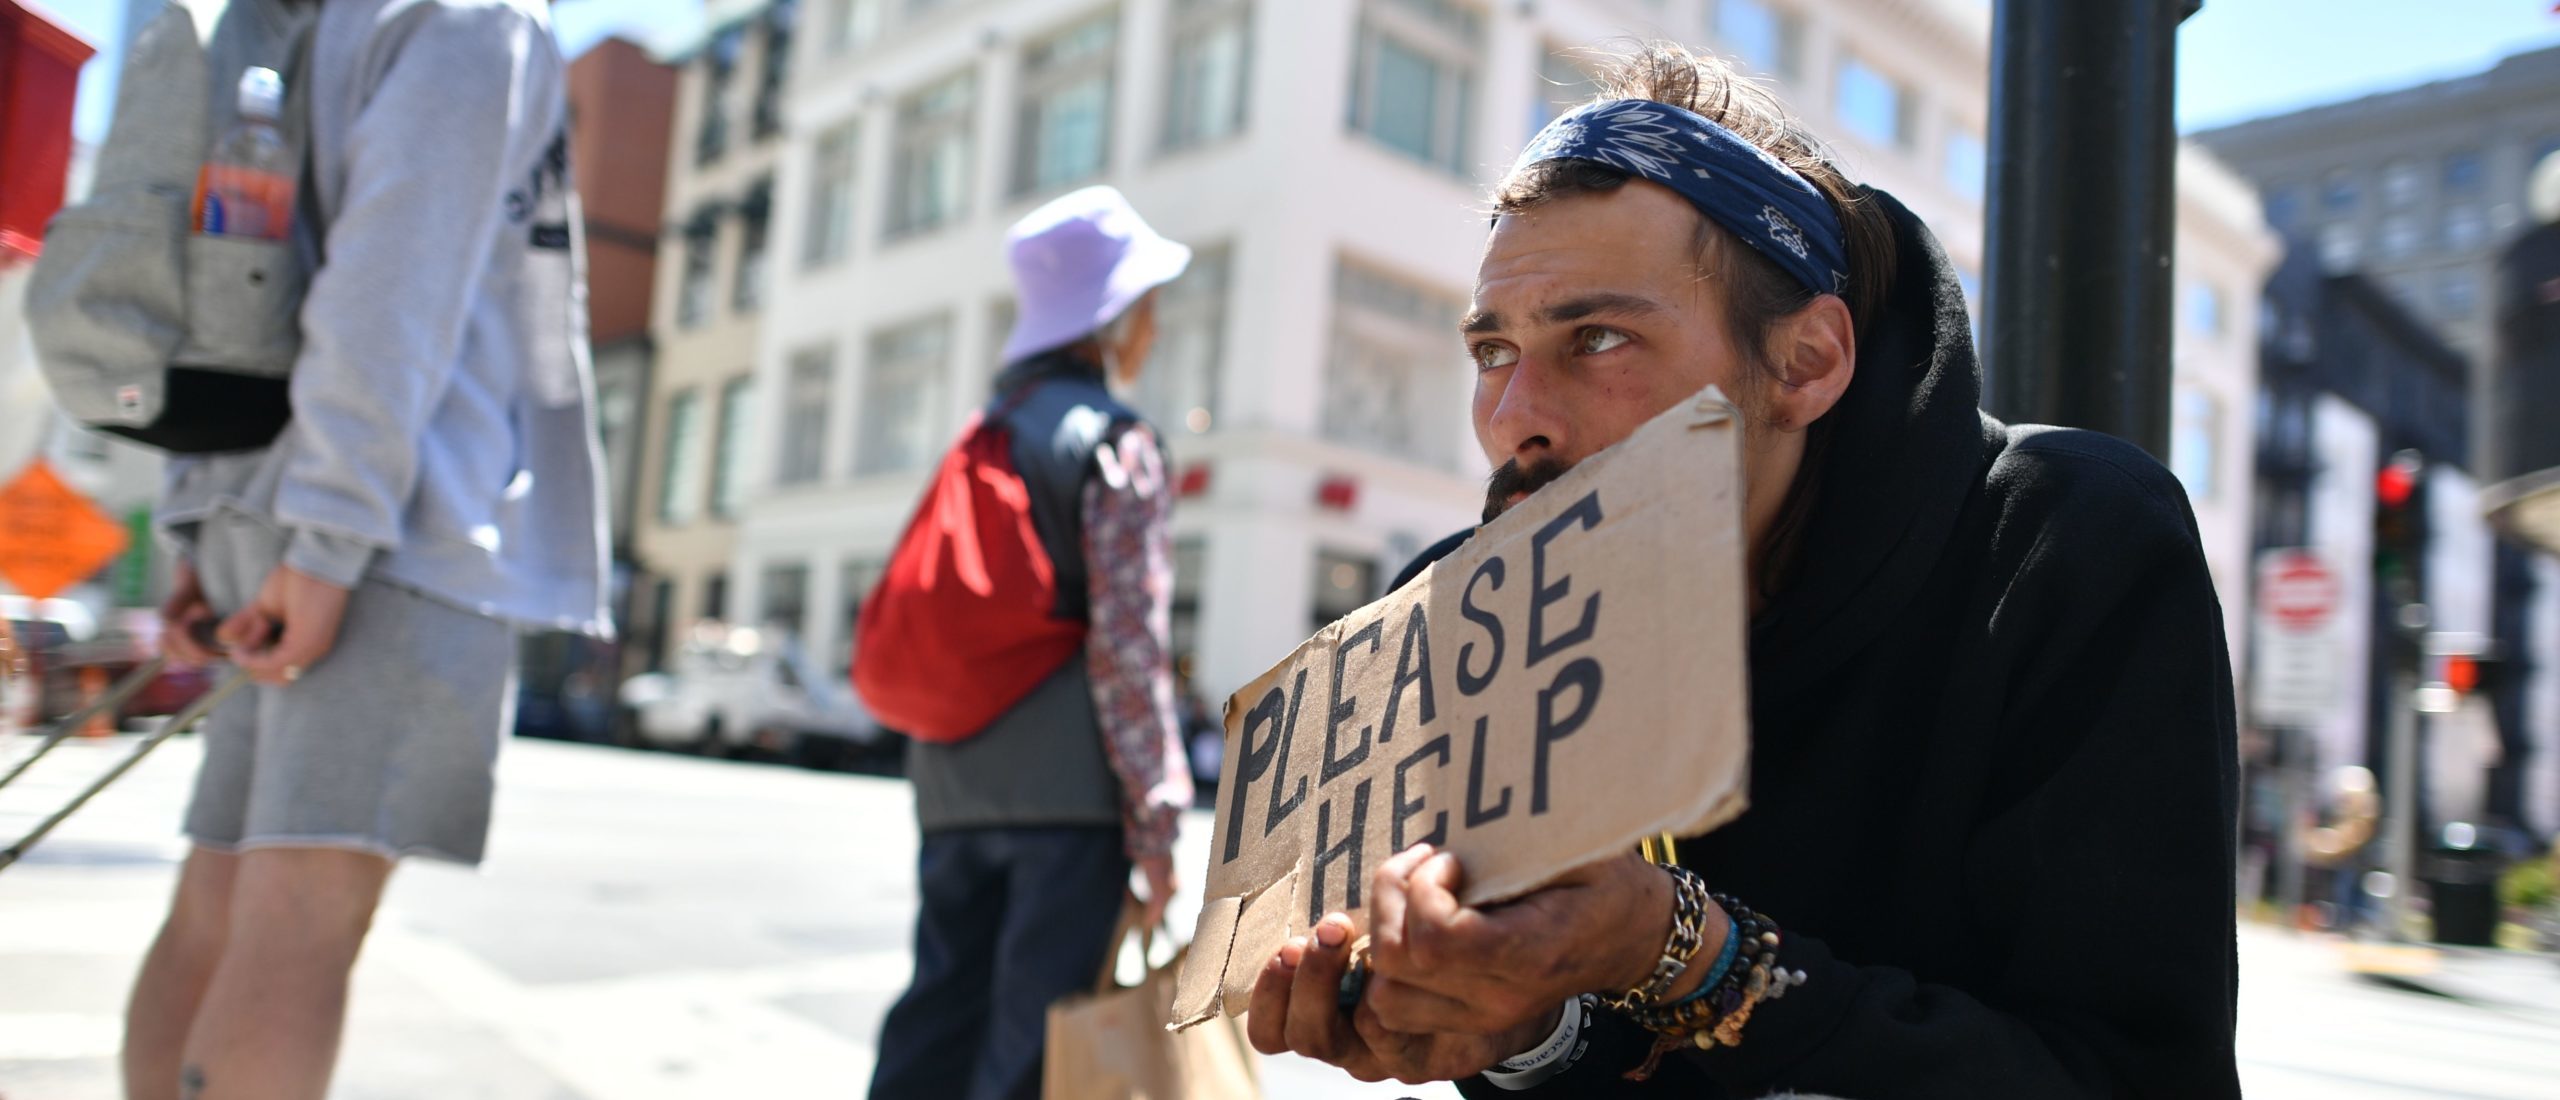 Andrew Loy begs along a sidewalk in downtown San Francisco, California on Tuesday, June, 28, 2016. Homelessness is on the rise in the city irking residents and bringing the problem under a spotlight. (Photo by Josh Edelson / AFP) (Photo credit should read JOSH EDELSON/AFP via Getty Images)